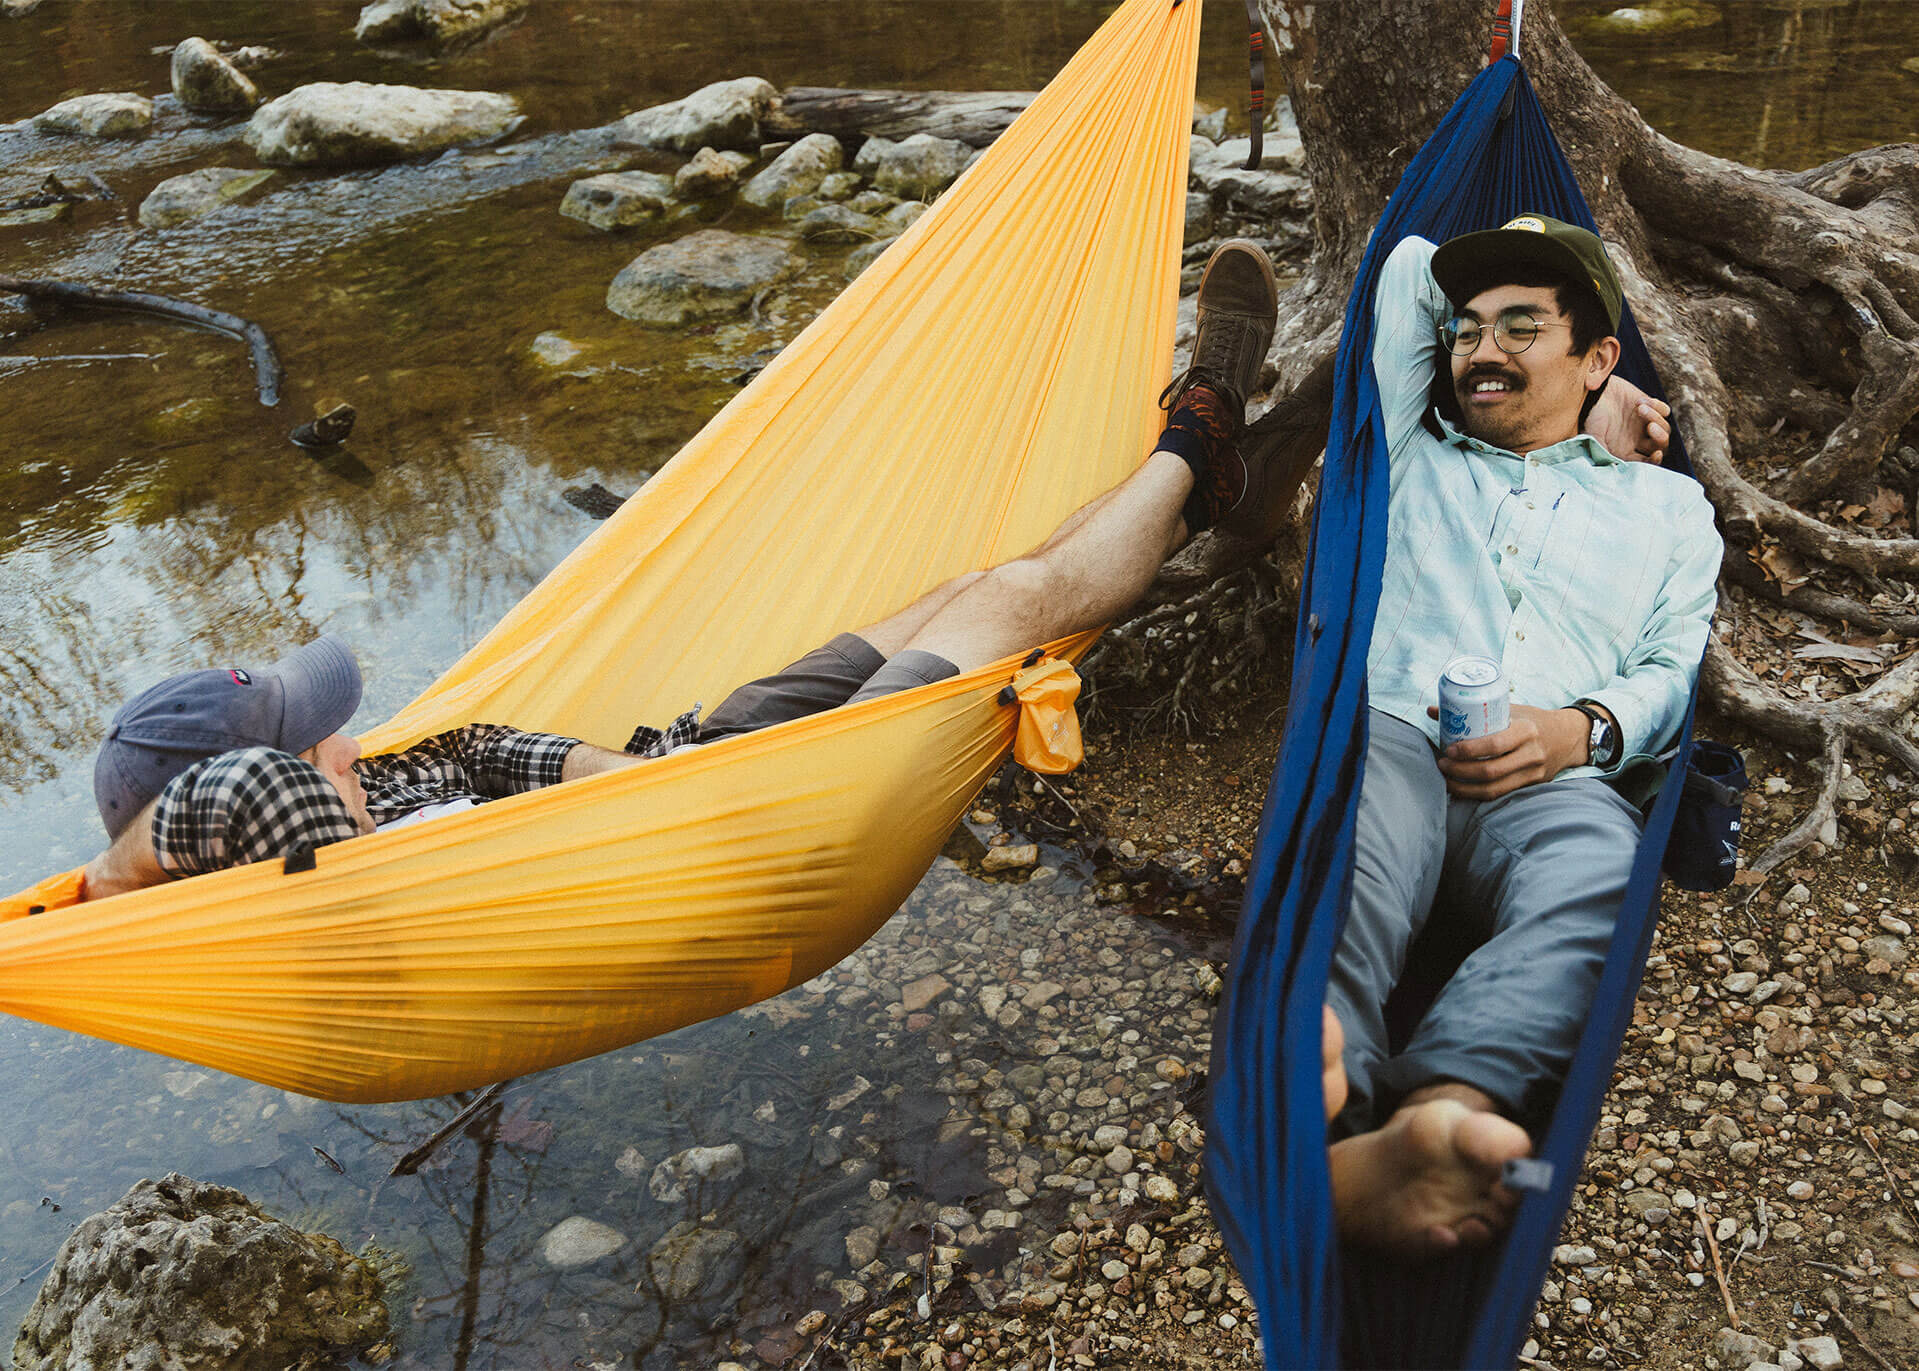 Men lounging in Kammok Roo Singles camping hammock in Midnight Blue and Sunflower Gold.